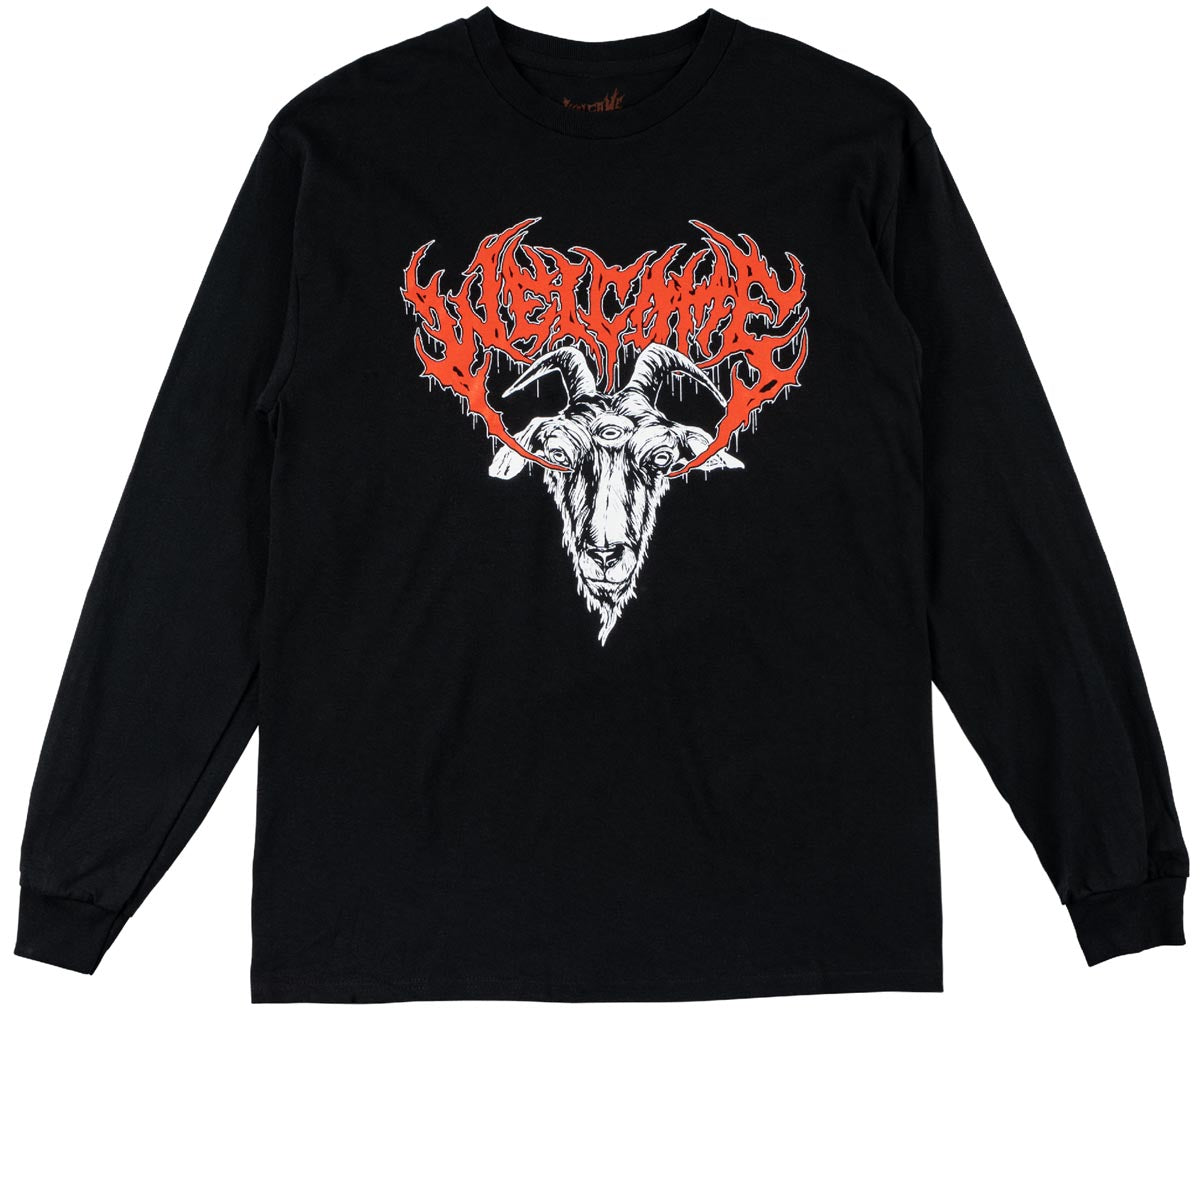 Welcome Pupil Long Sleeve T-Shirt - Black image 1